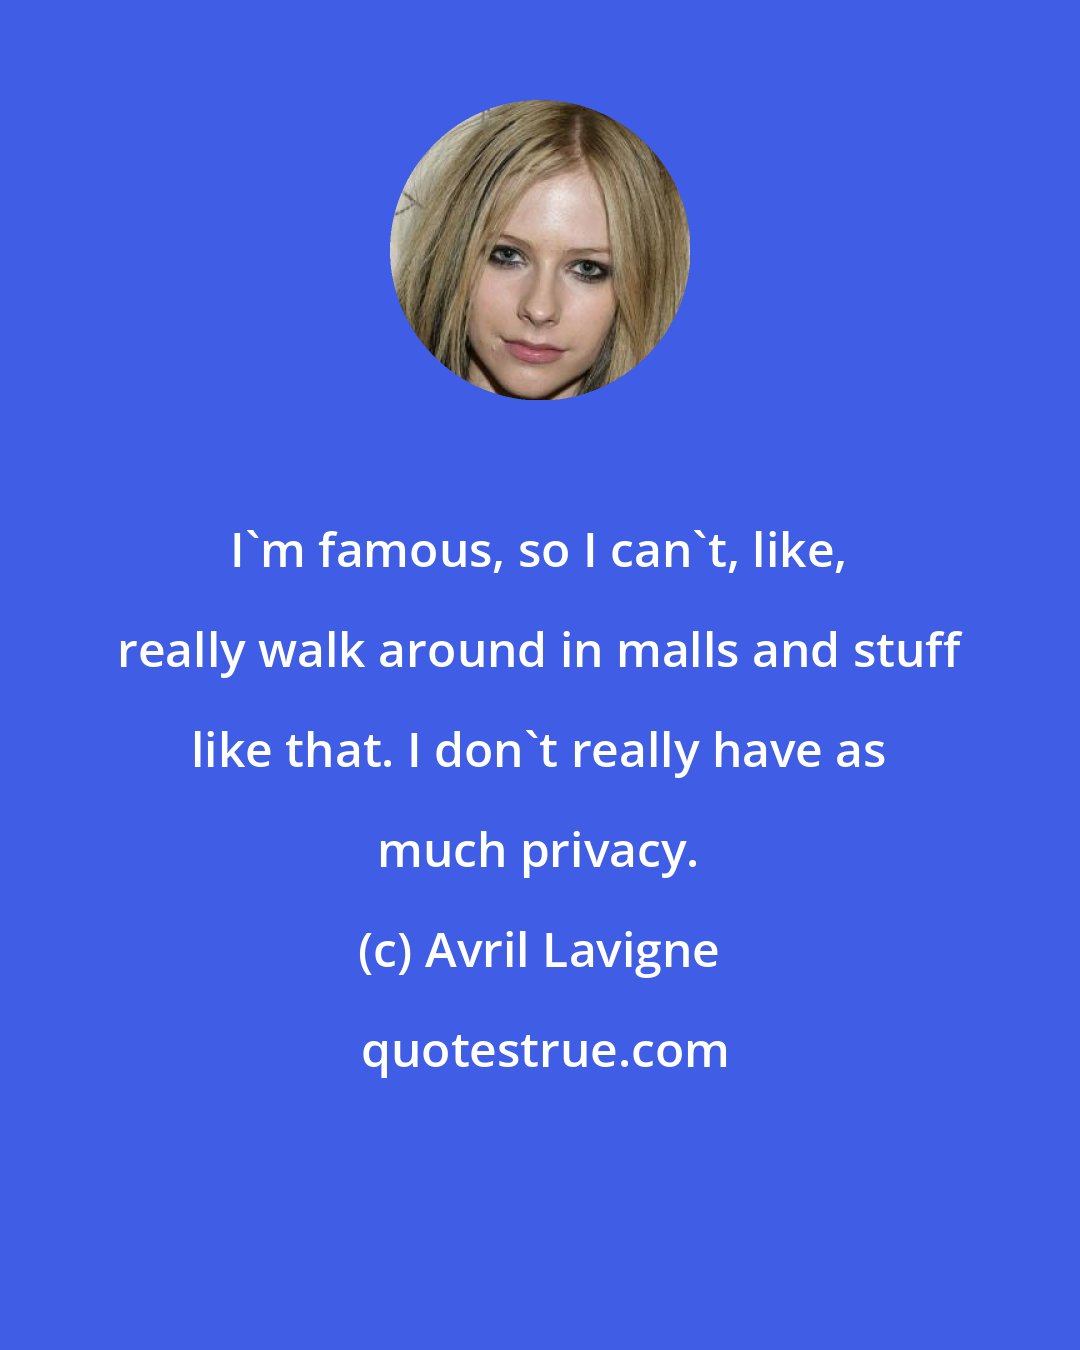 Avril Lavigne: I'm famous, so I can't, like, really walk around in malls and stuff like that. I don't really have as much privacy.